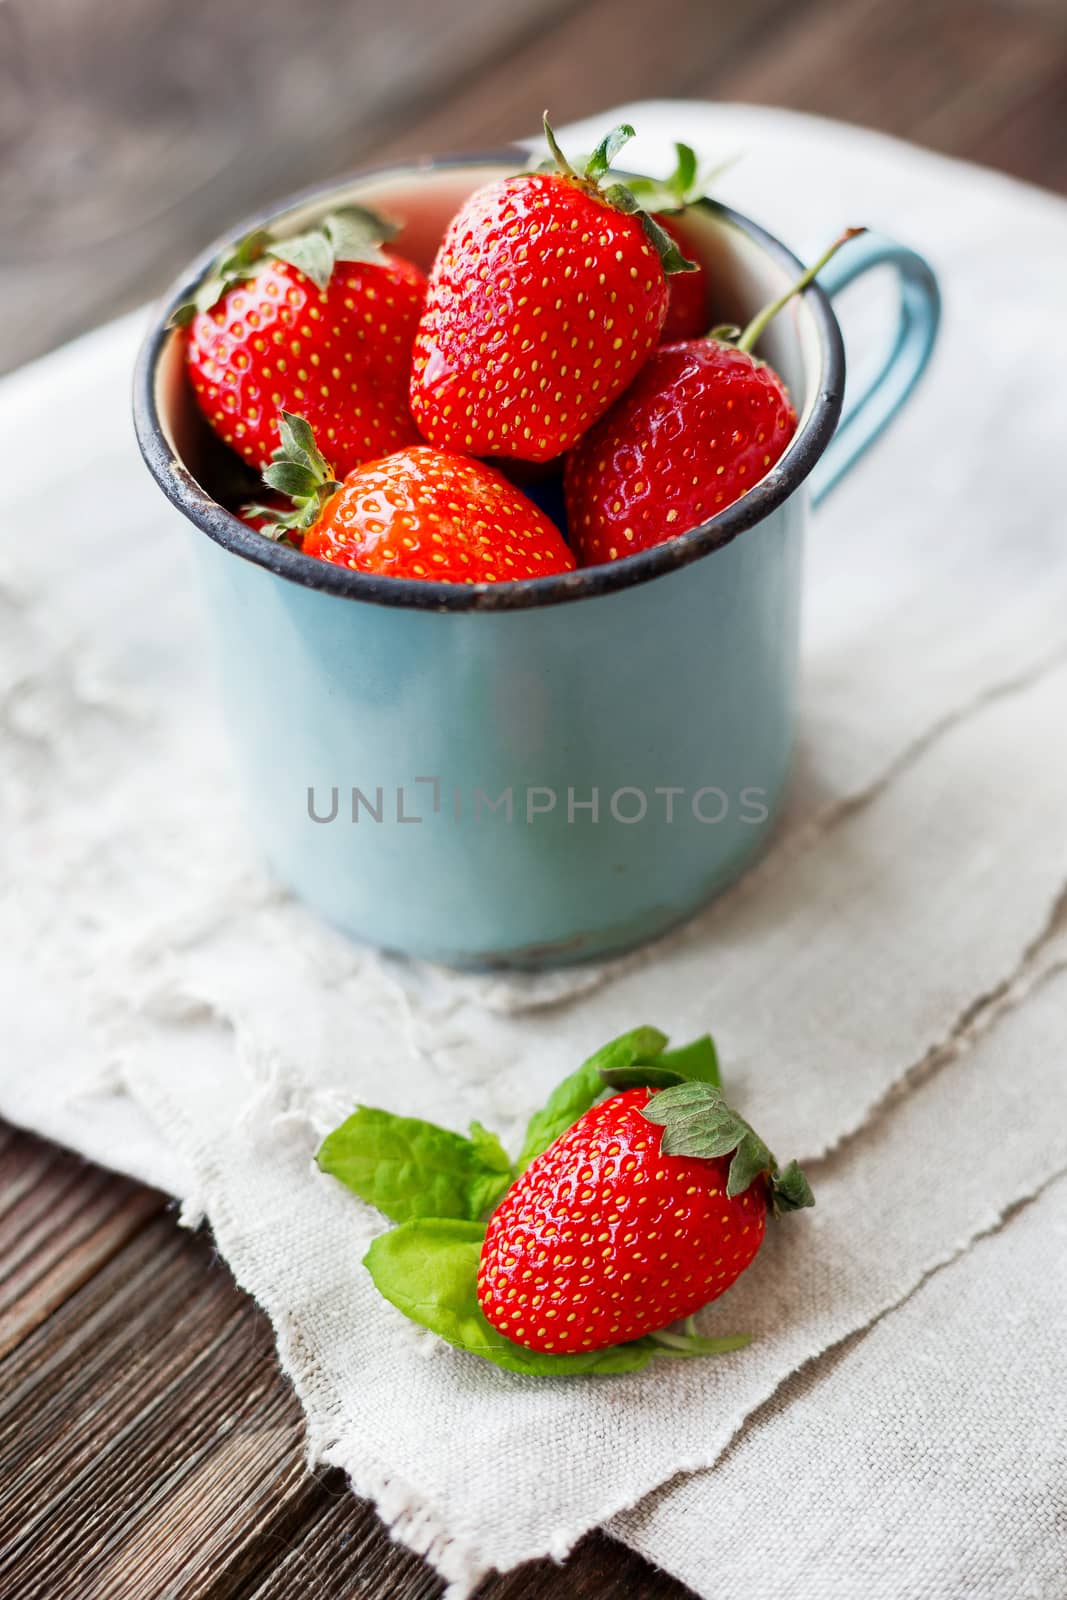 Fresh juicy strawberries in old rusty mug. Rustic wooden background with homespun napkin.